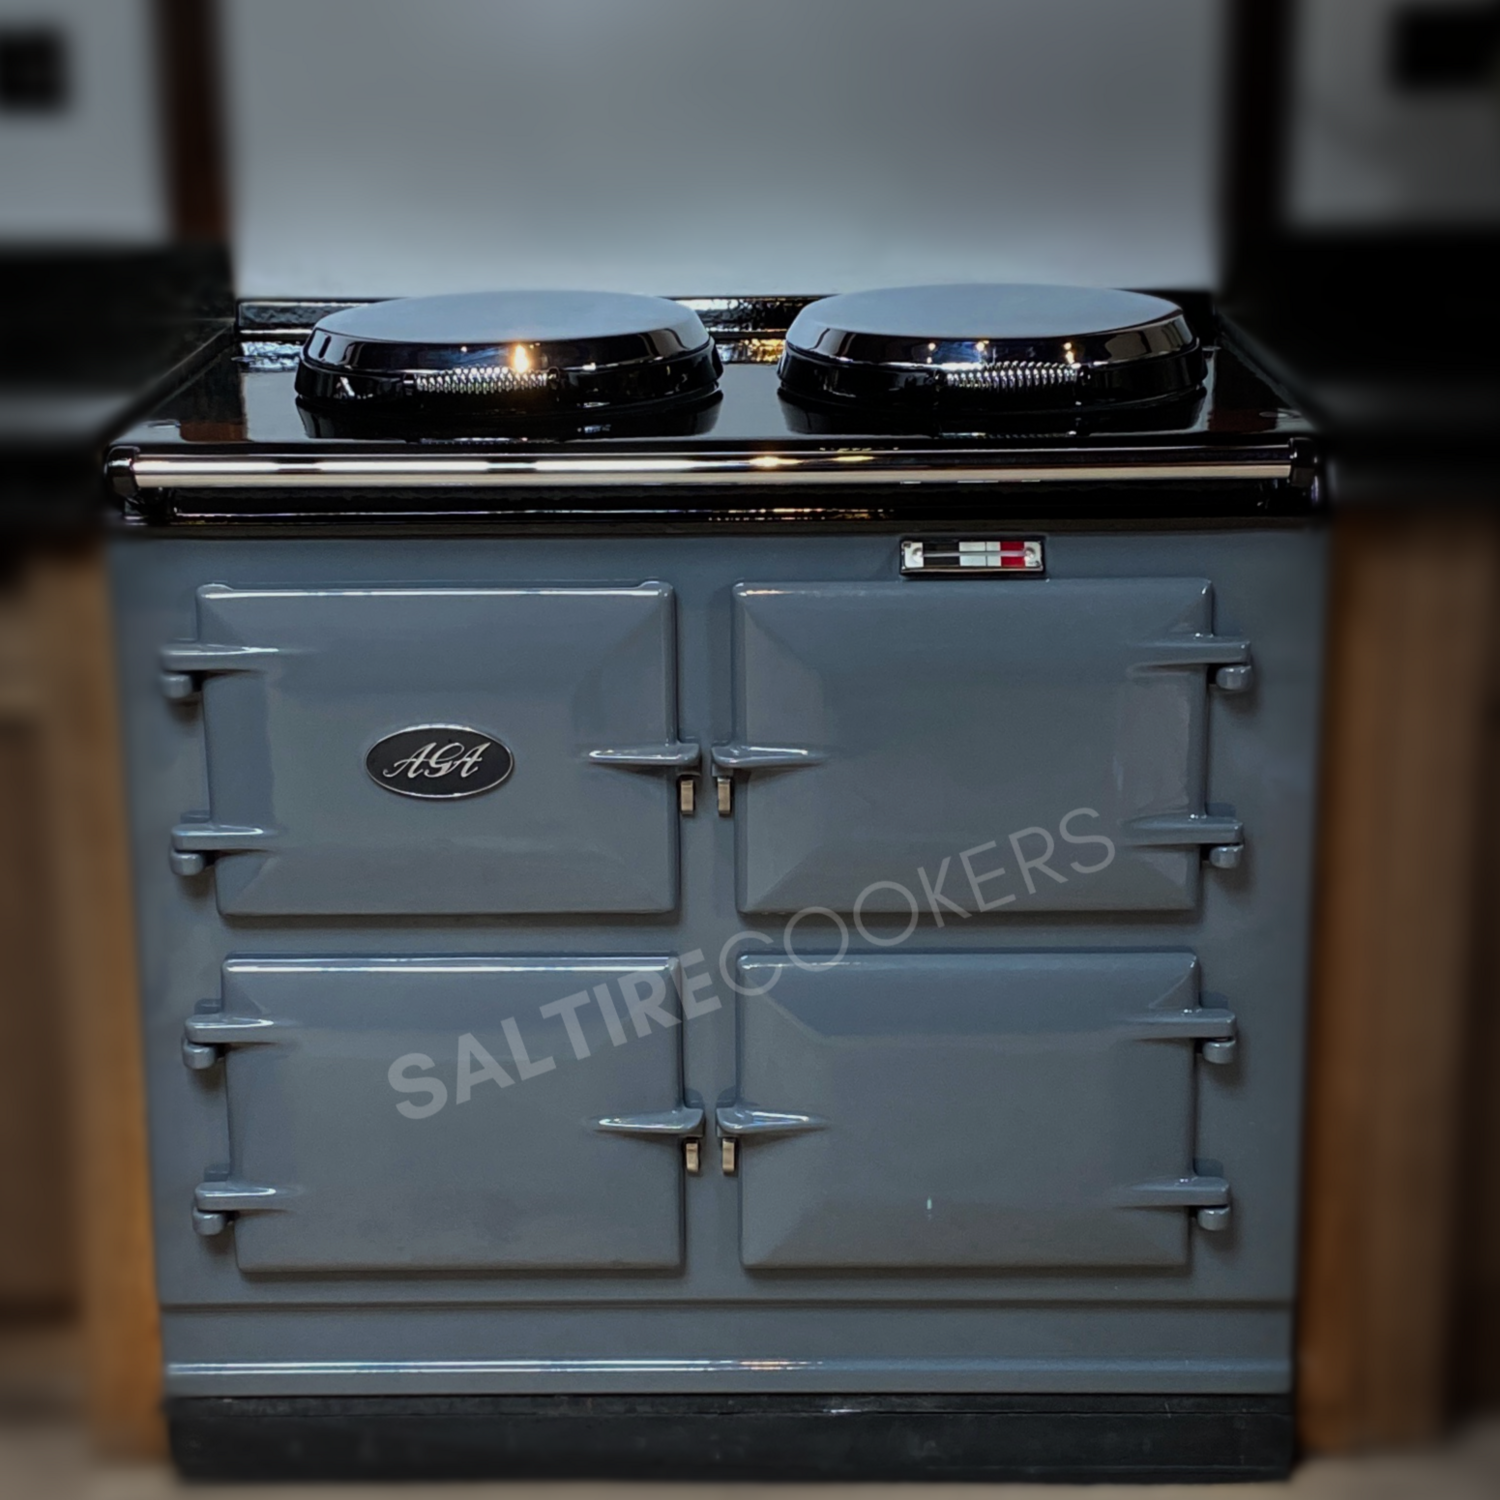 Reconditioned 3 Oven eControl Aga Cooker (Slate)